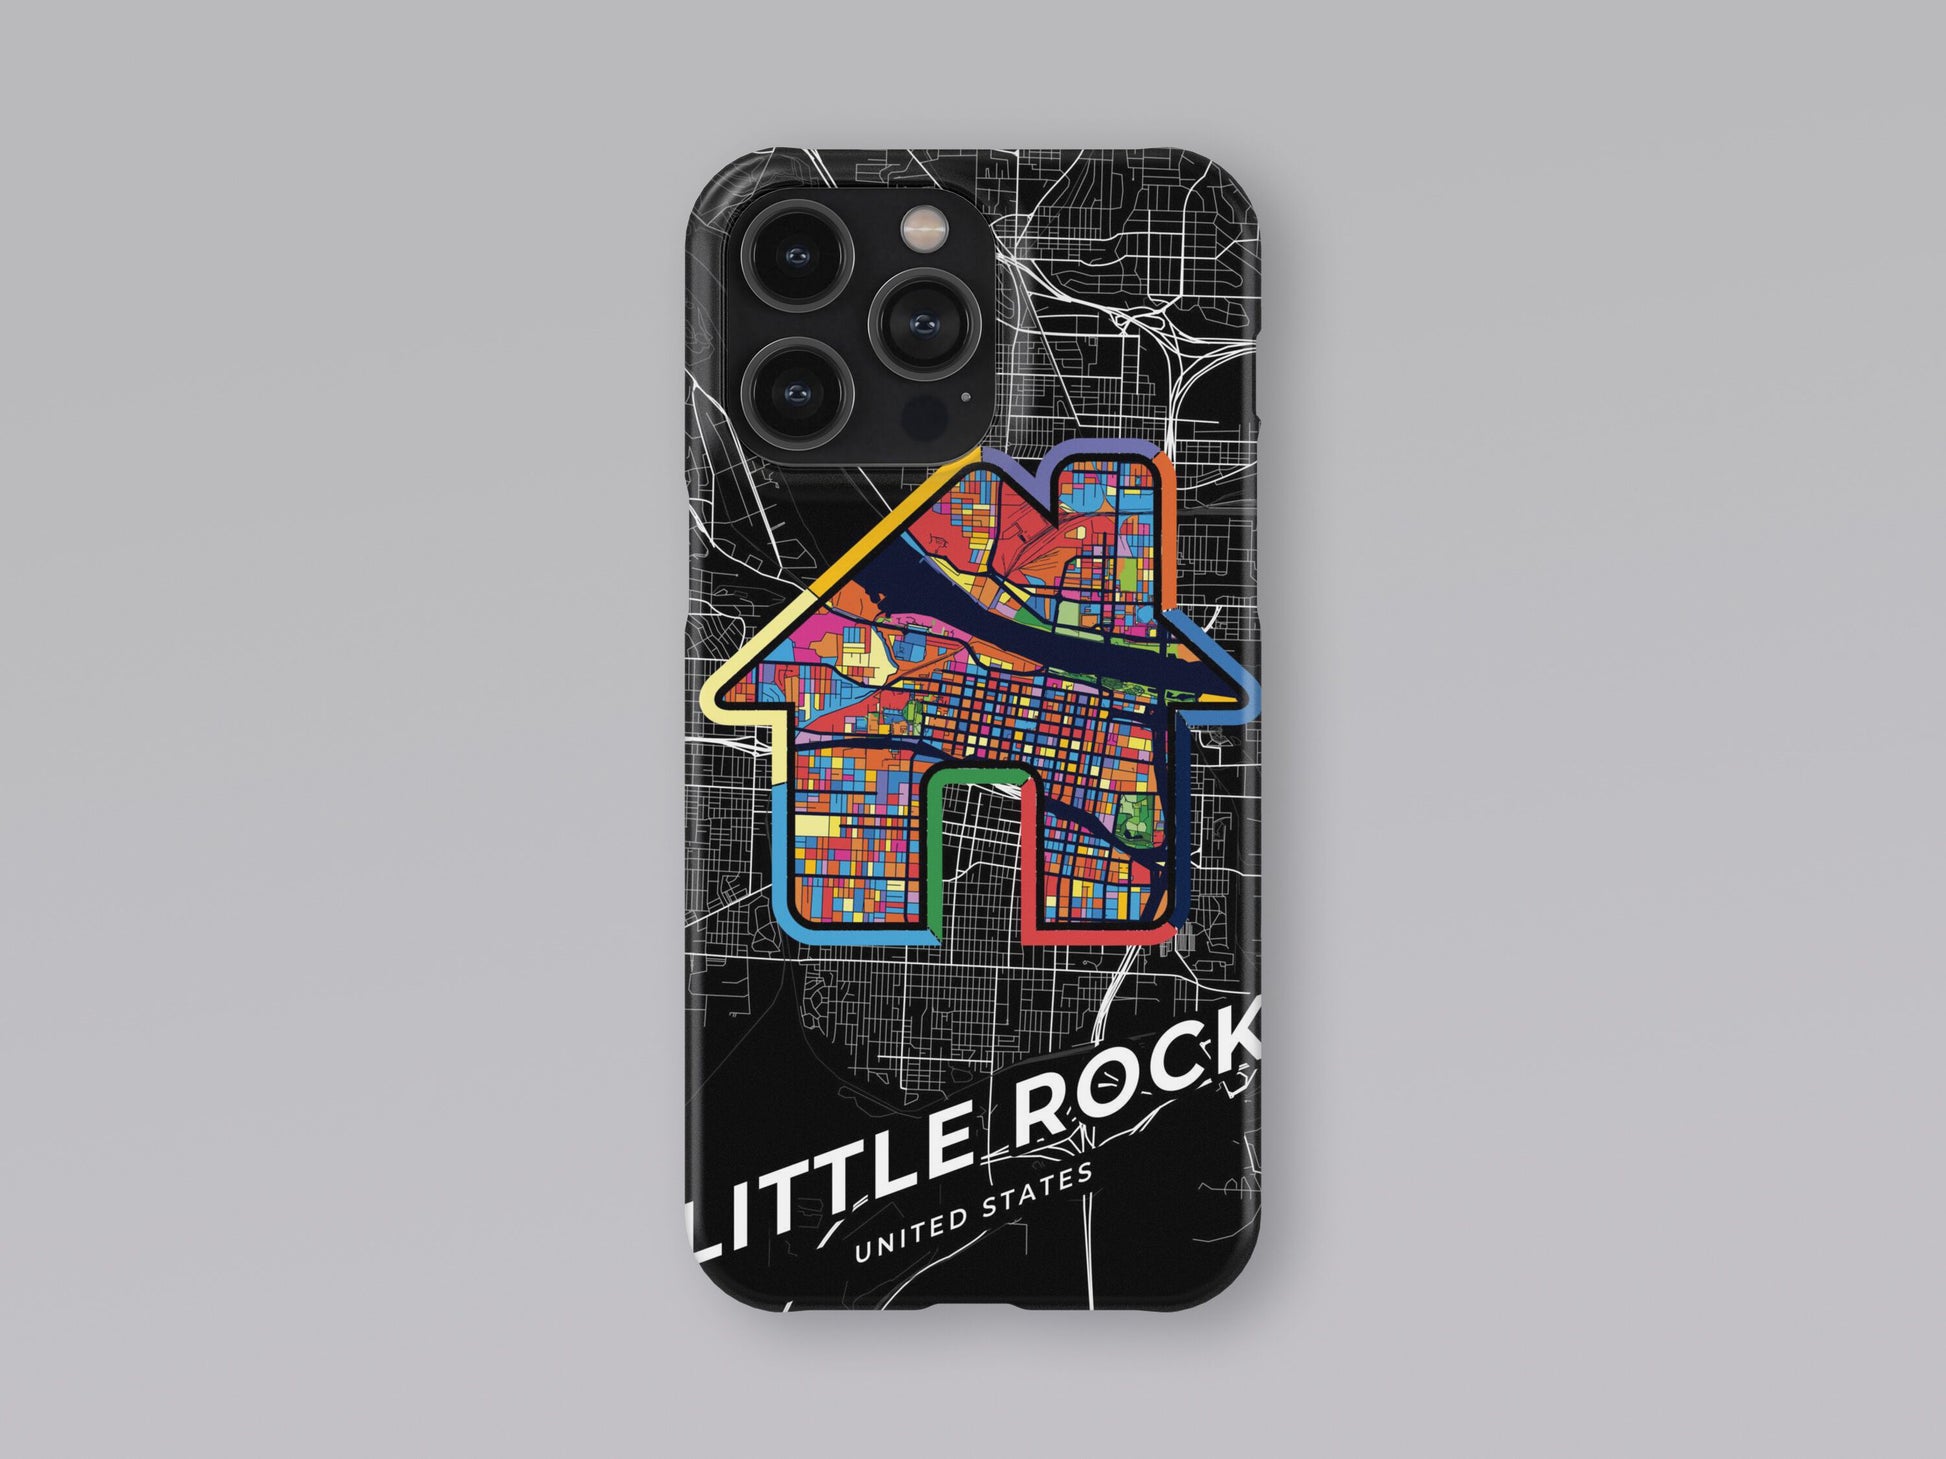 Little Rock Arkansas slim phone case with colorful icon. Birthday, wedding or housewarming gift. Couple match cases. 3